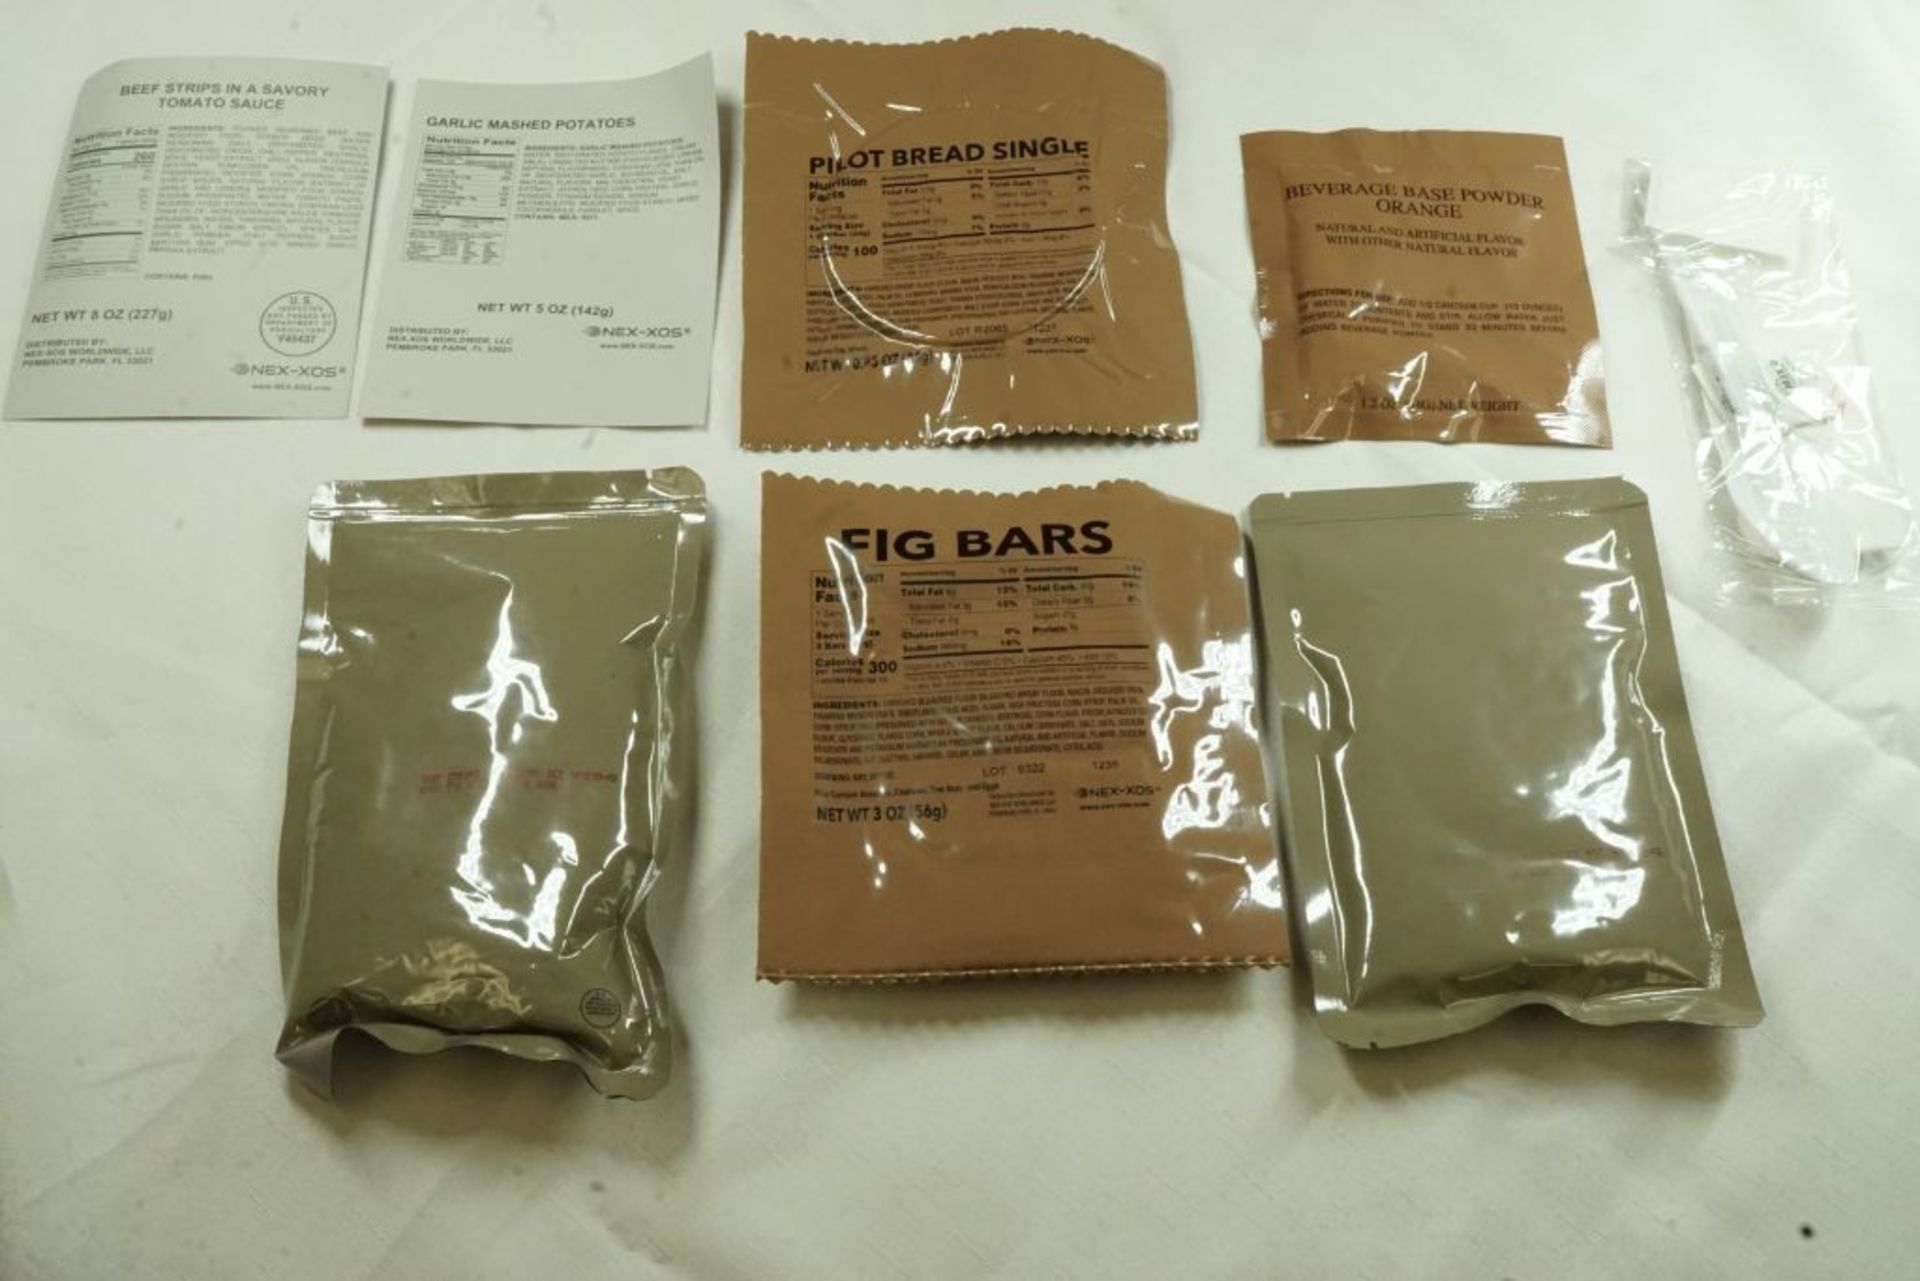 Lot of (48) Cases of XMRE Meals - Extended Shelf Life Meal, Ready to Eat - Image 6 of 16